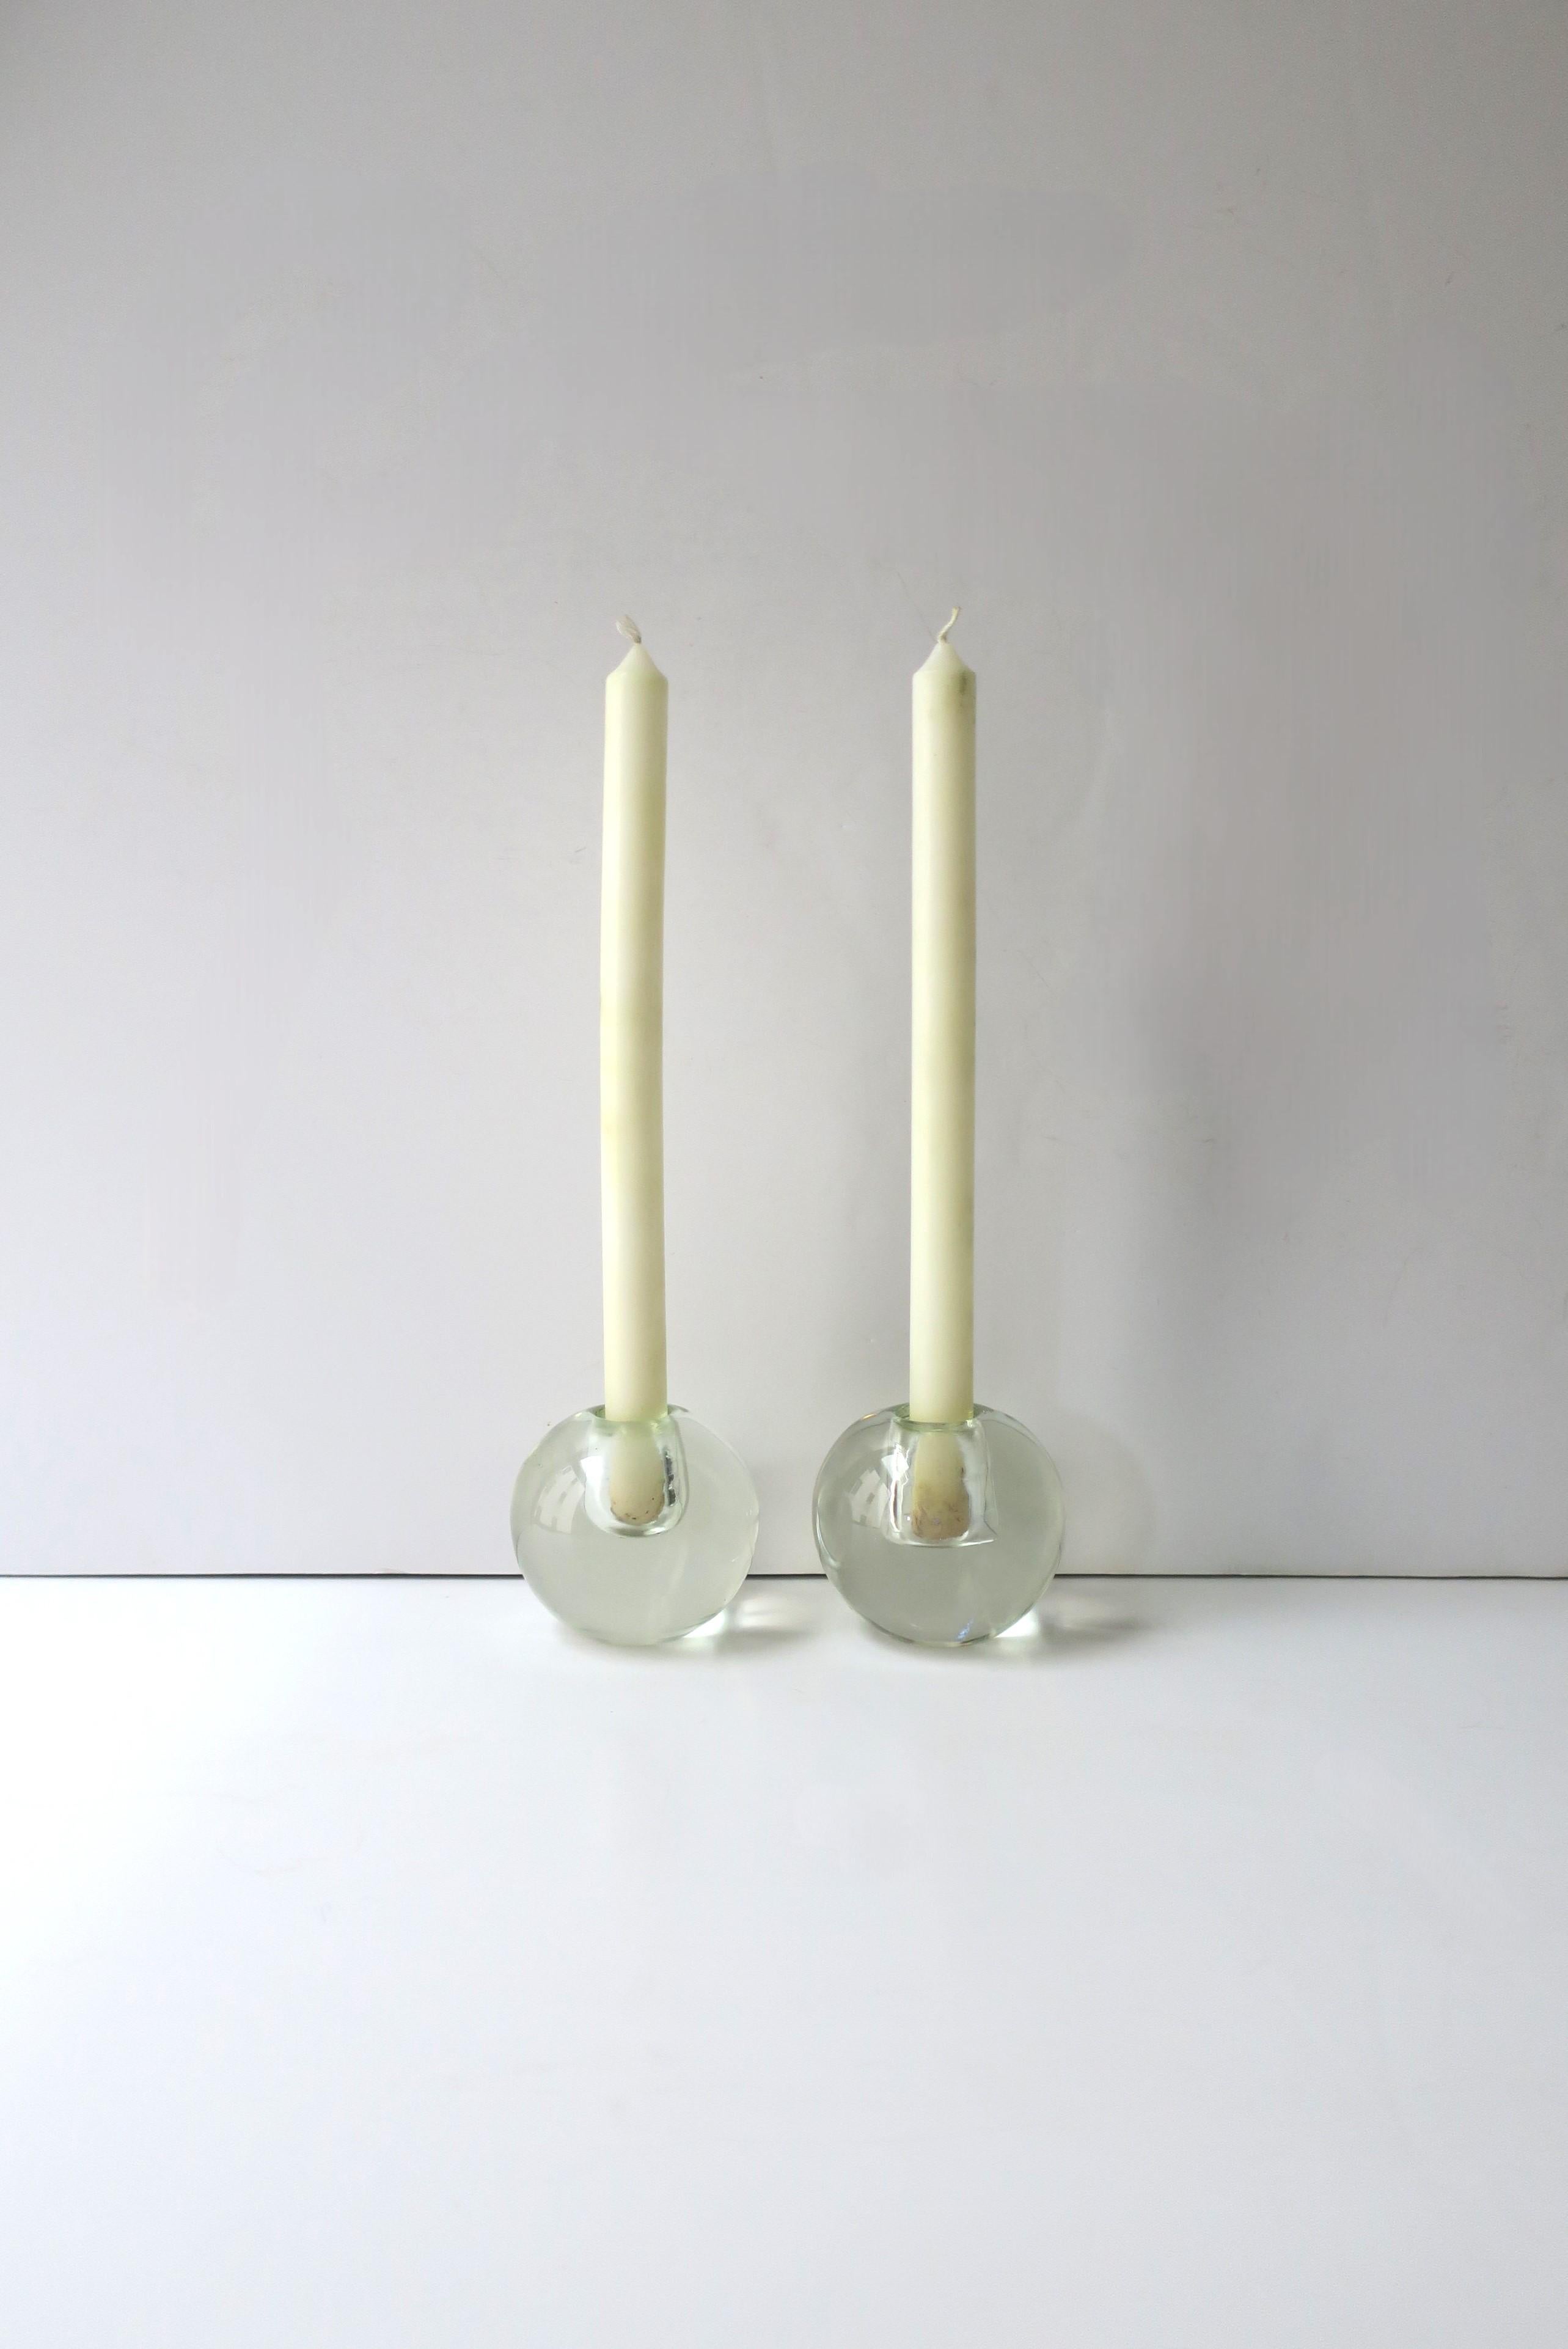 A substantial pair of transparent glass candlestick holders with a round sphere design, in the Modern style, circa mid-late-20th century. Very good condition as shown in images. Dimensions: 3